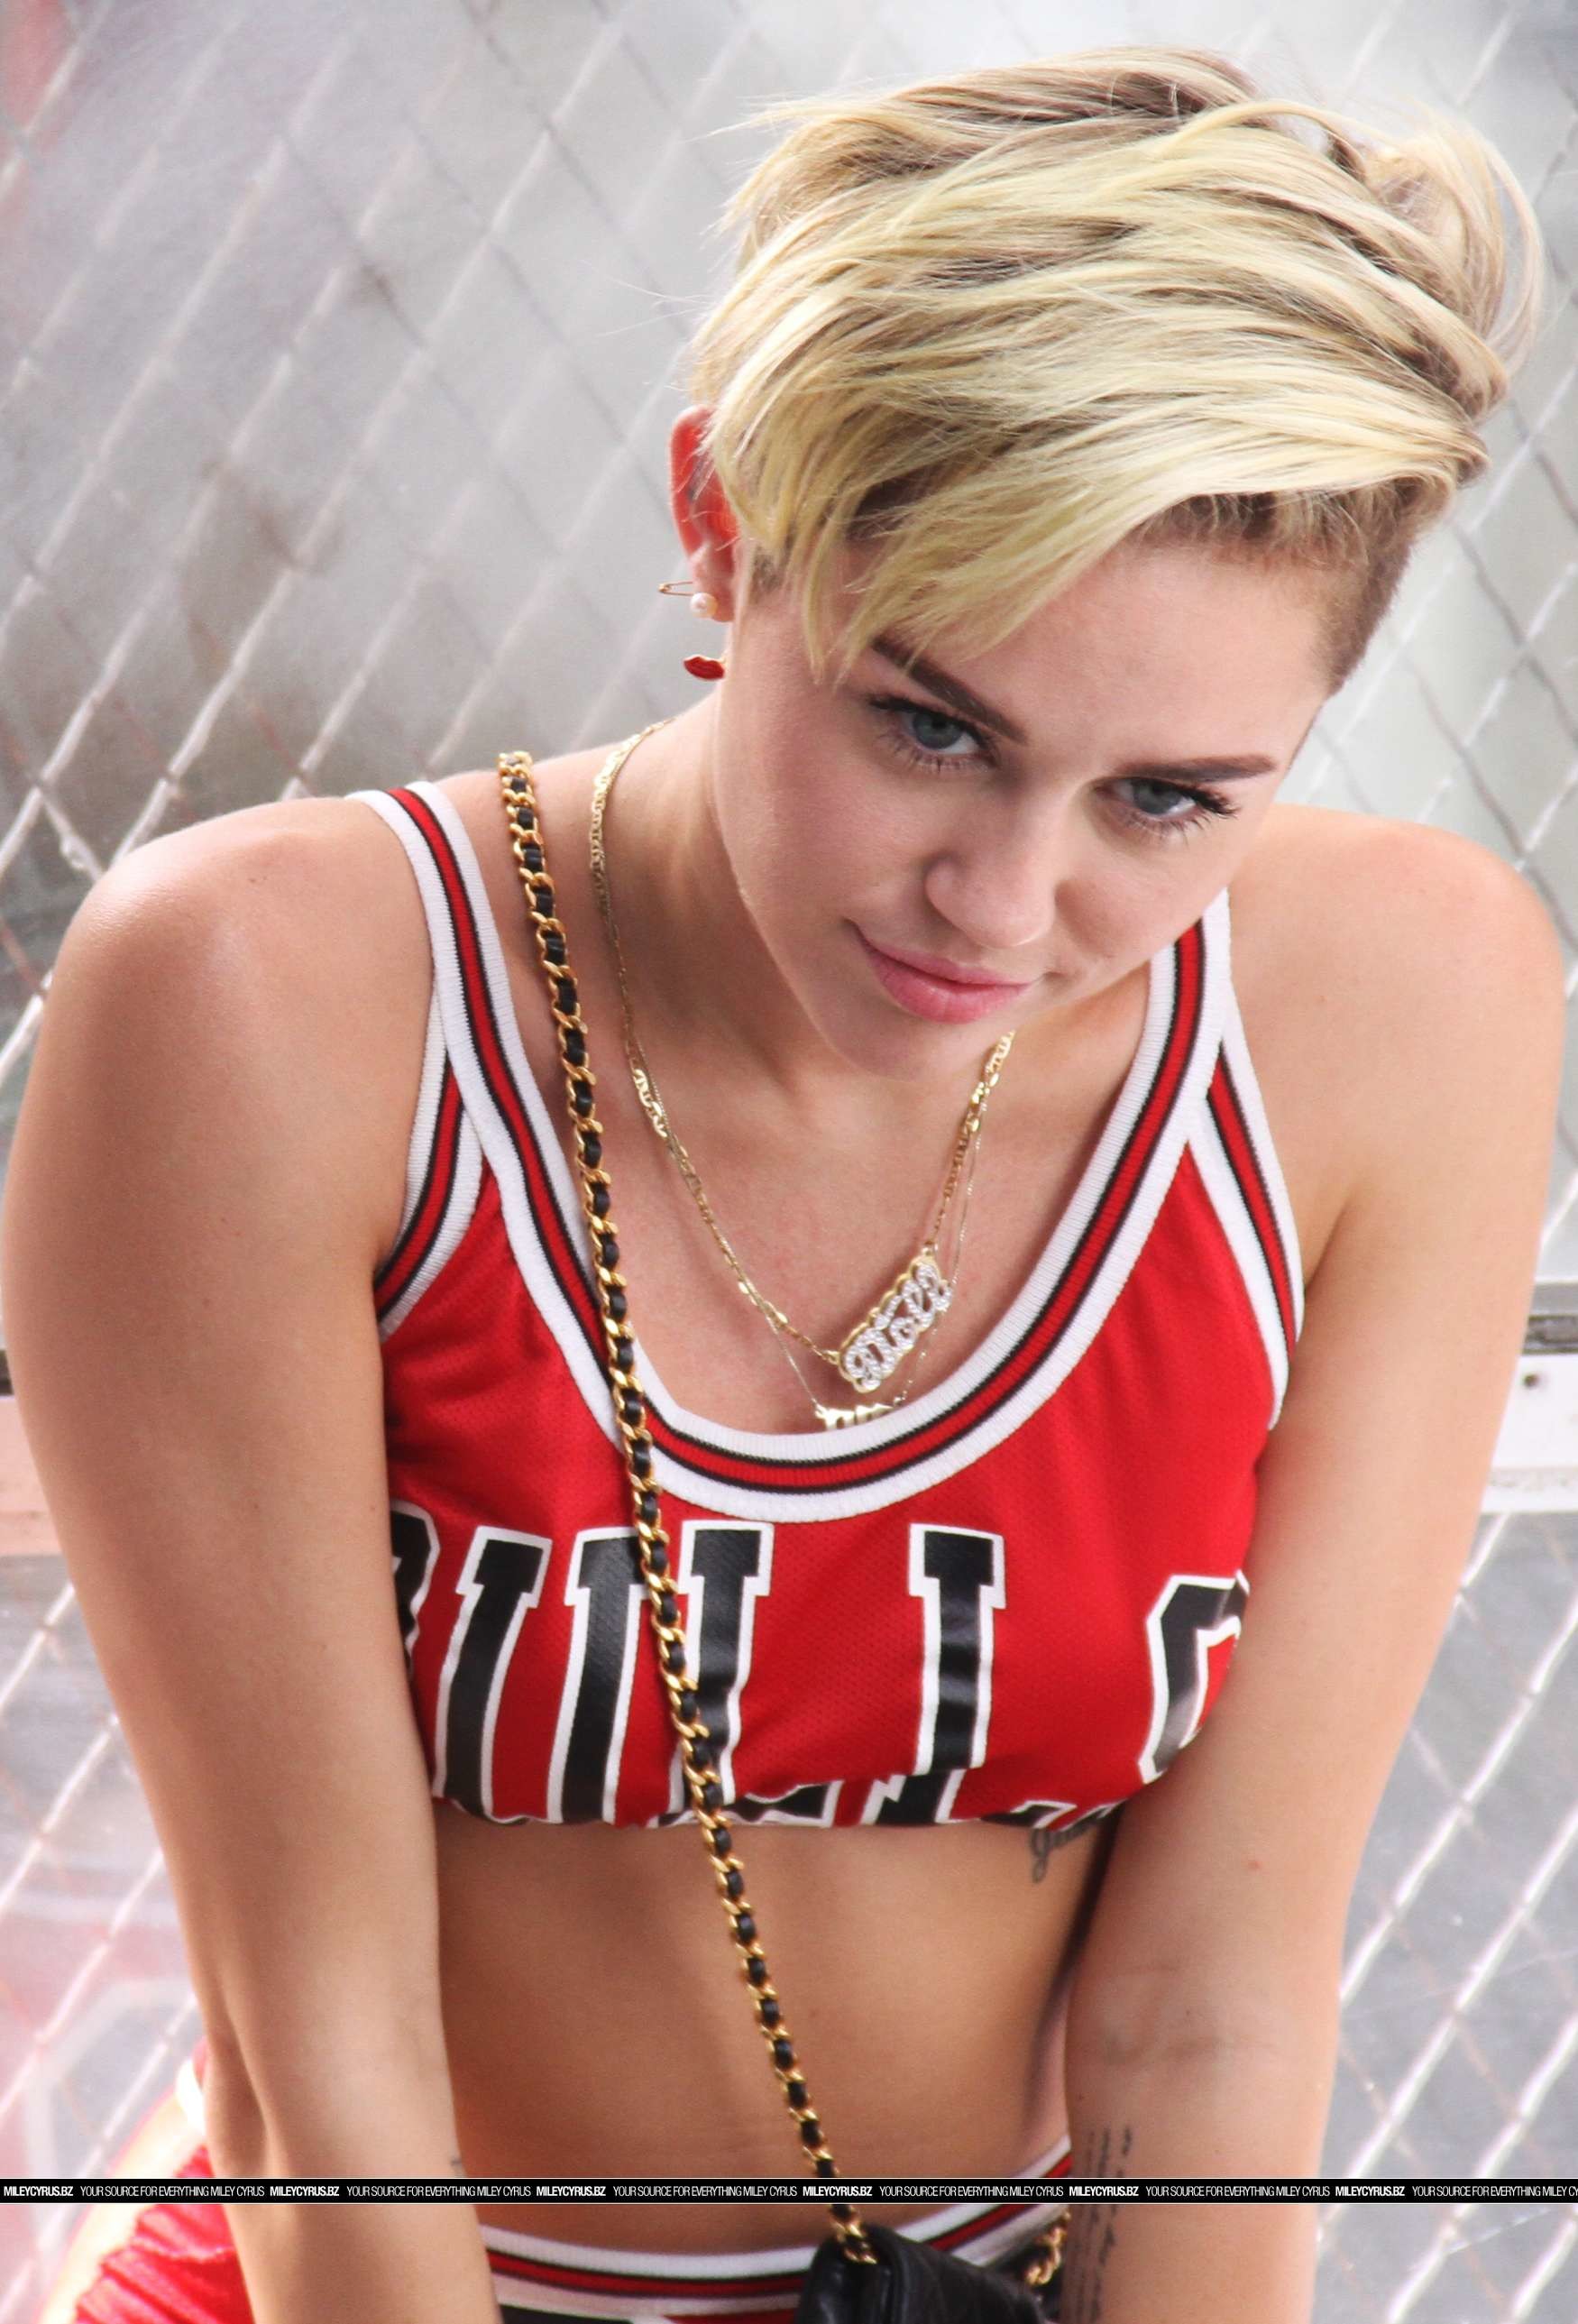 1750x2577 Miley Cyrus – 23 Music Video Portraits -03 - Full Size